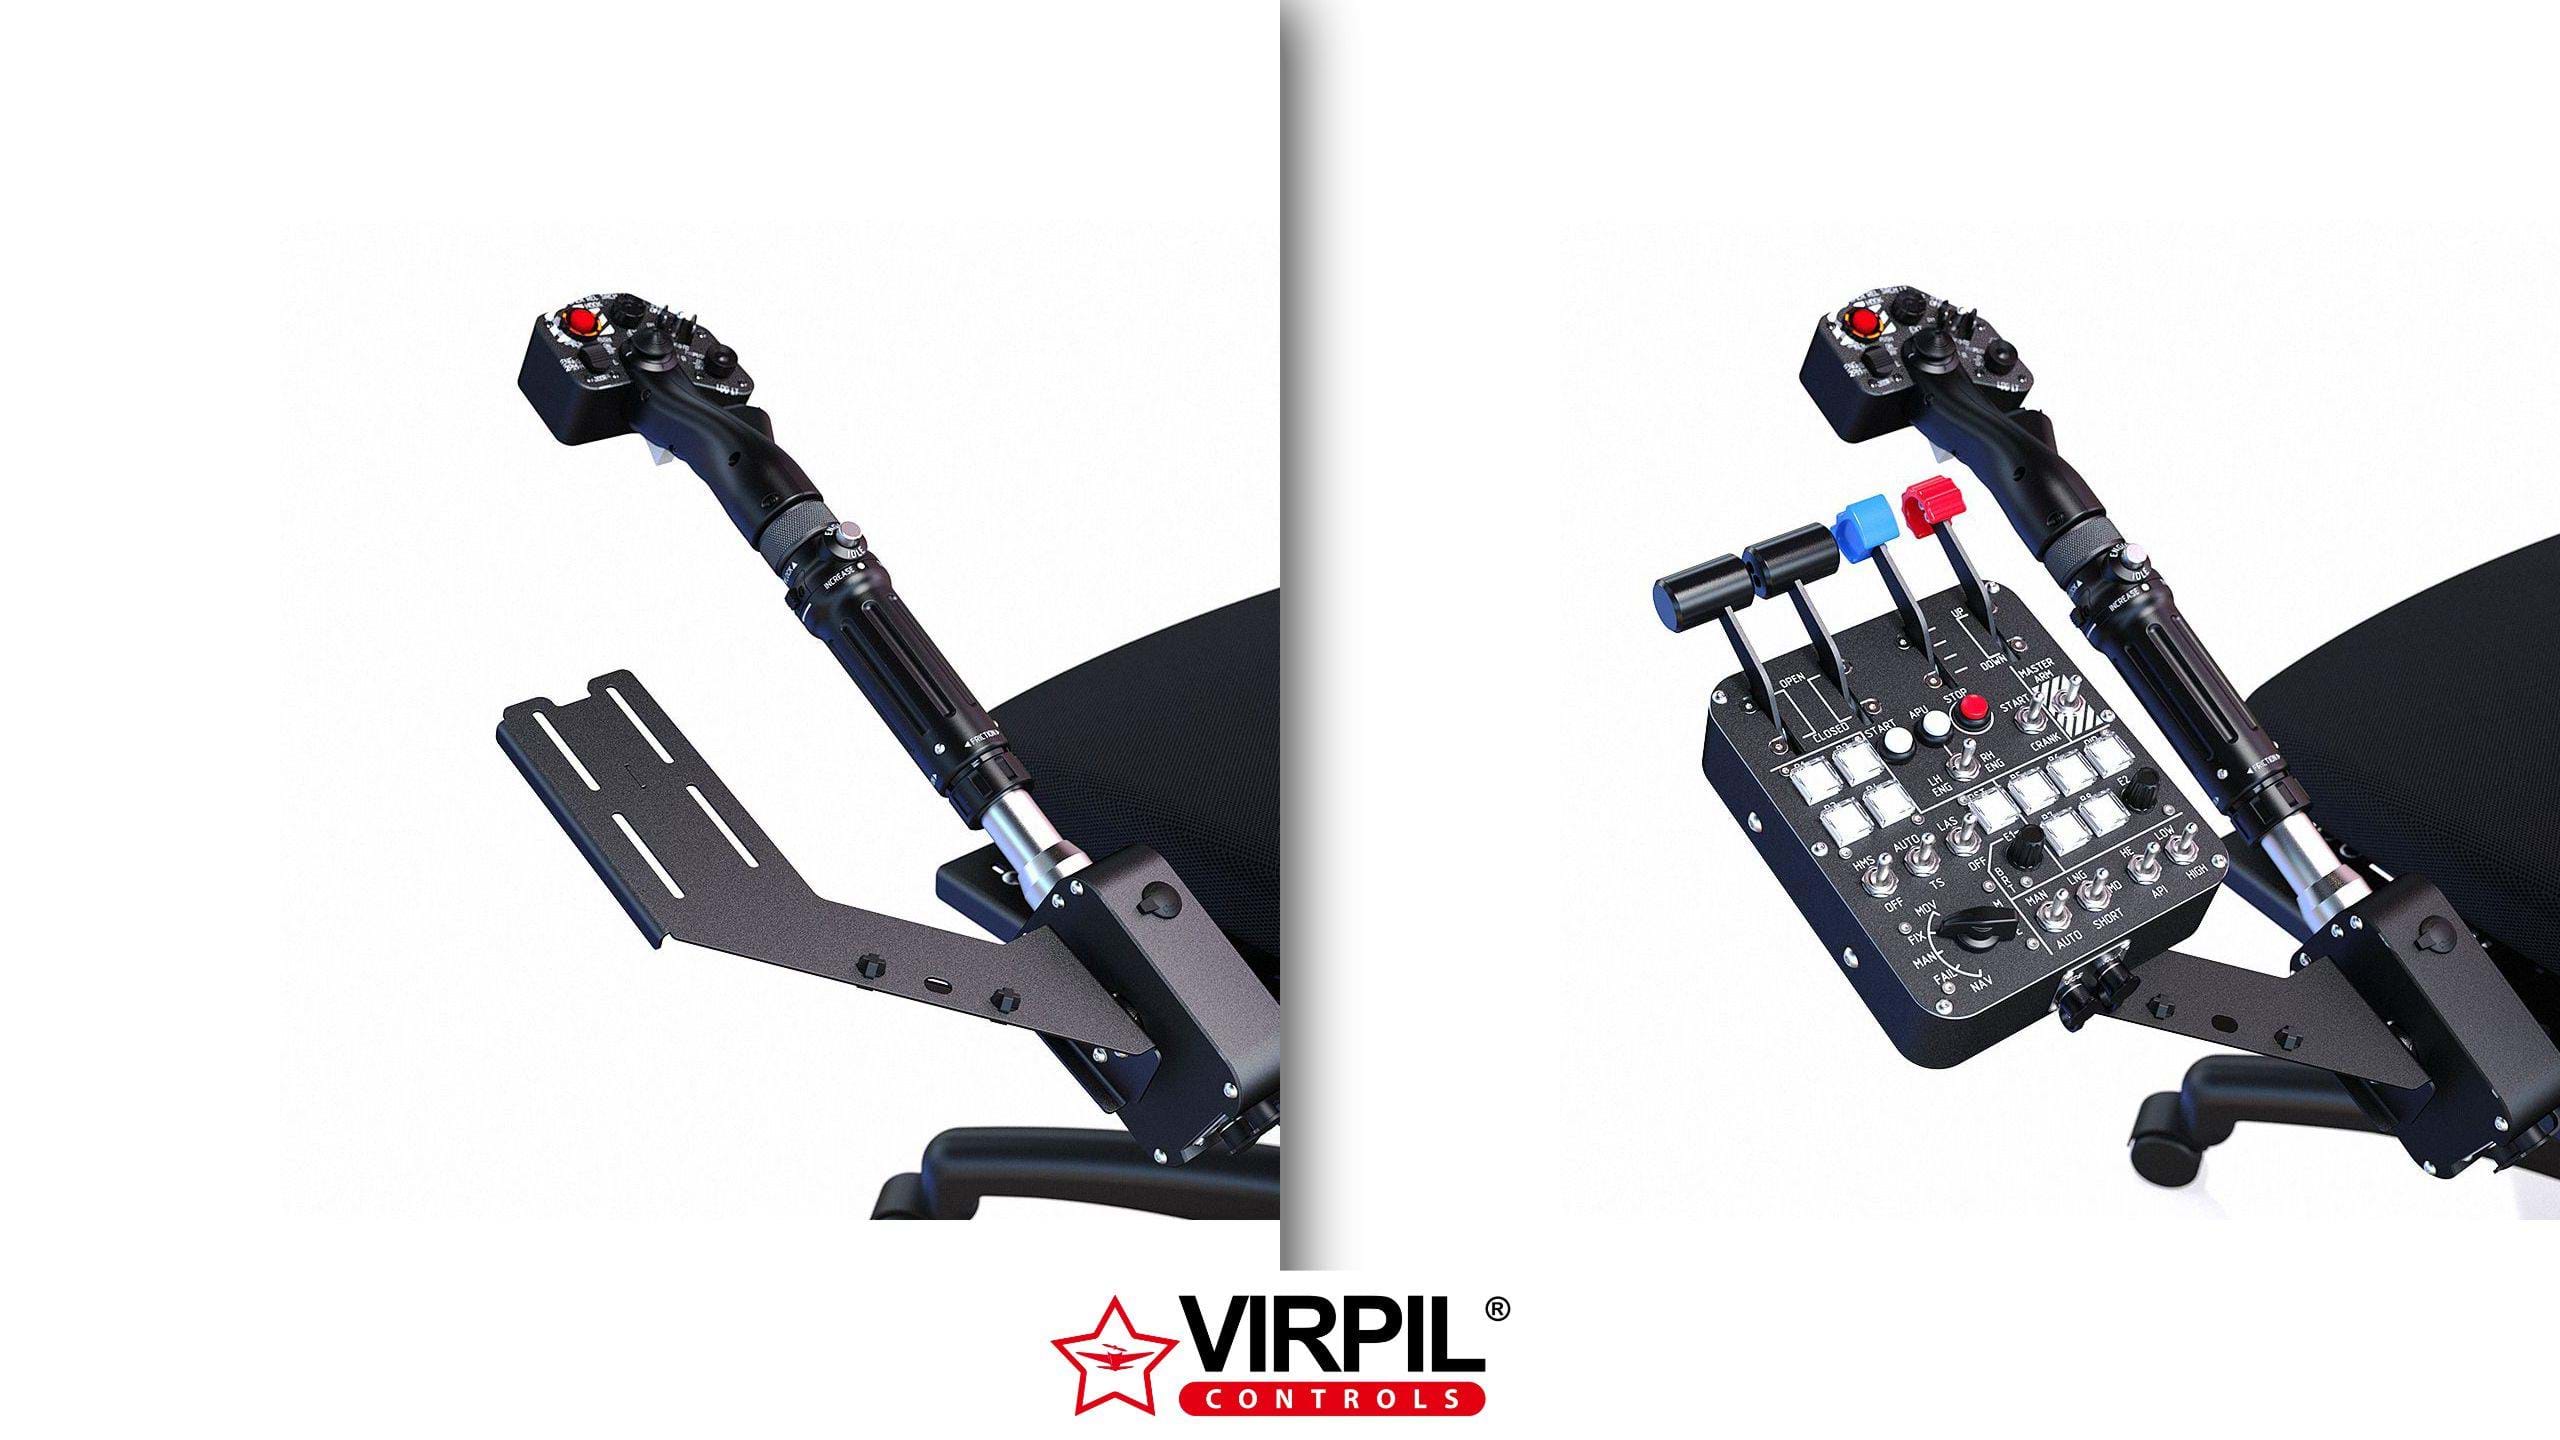 VIRPIL Released Control Panel Mount Adapter for their Collective